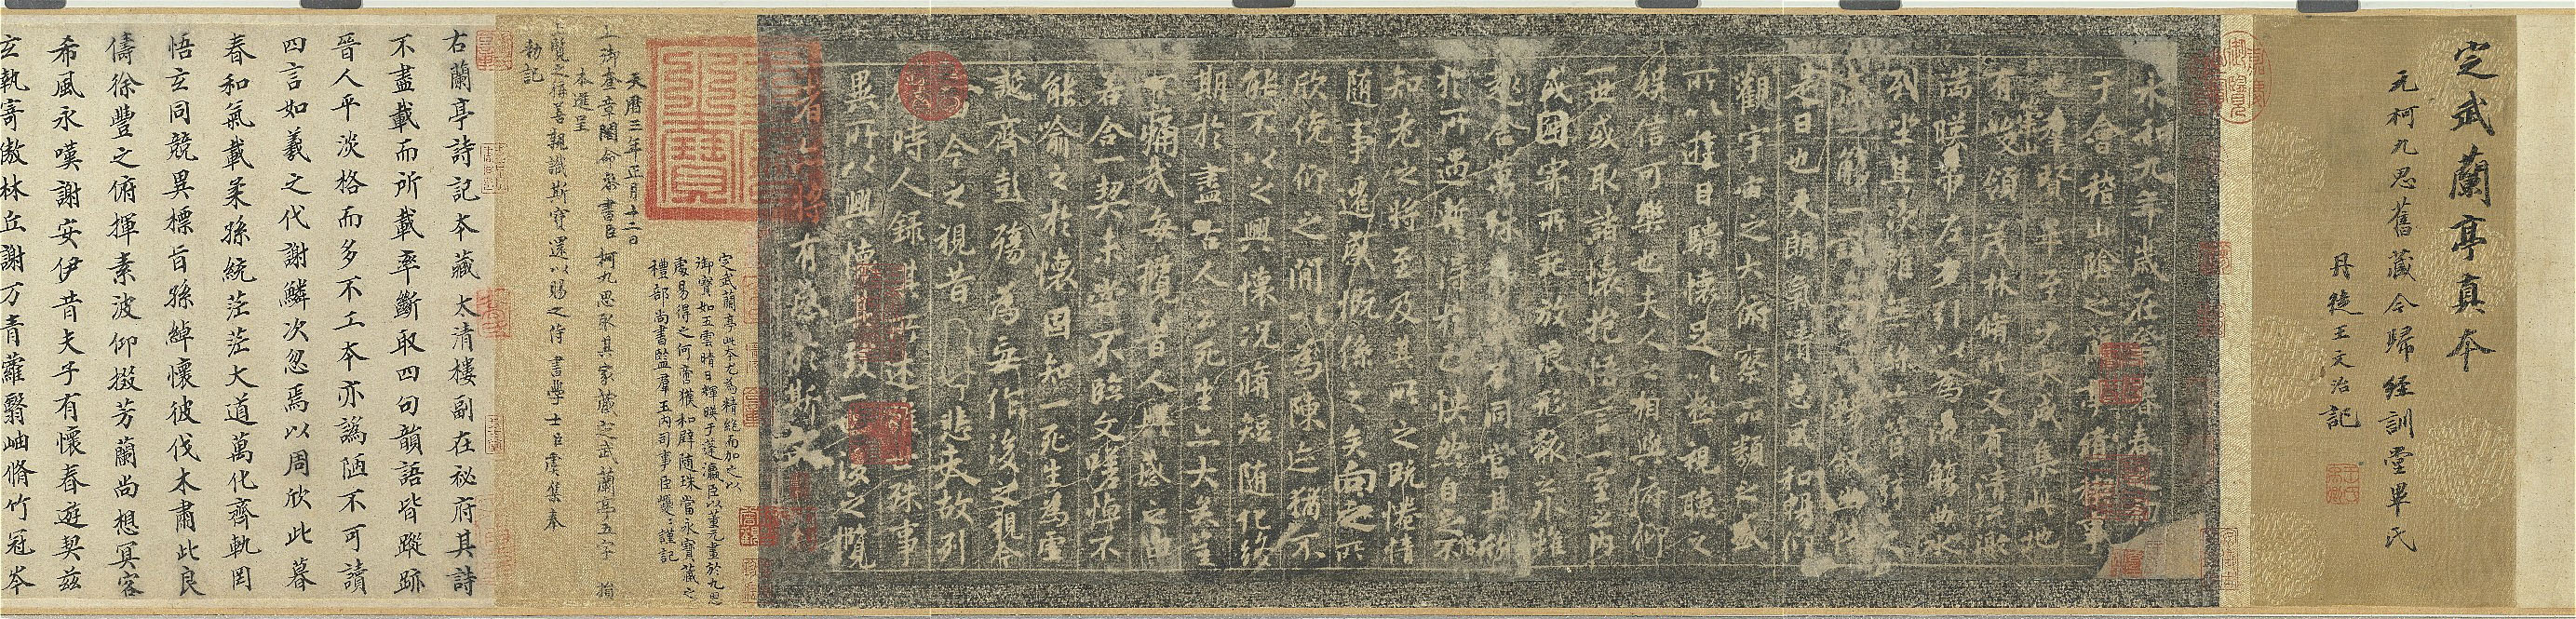 An Authentic Rubbing from the Dingwu Edition of the “Orchid Pavilion”